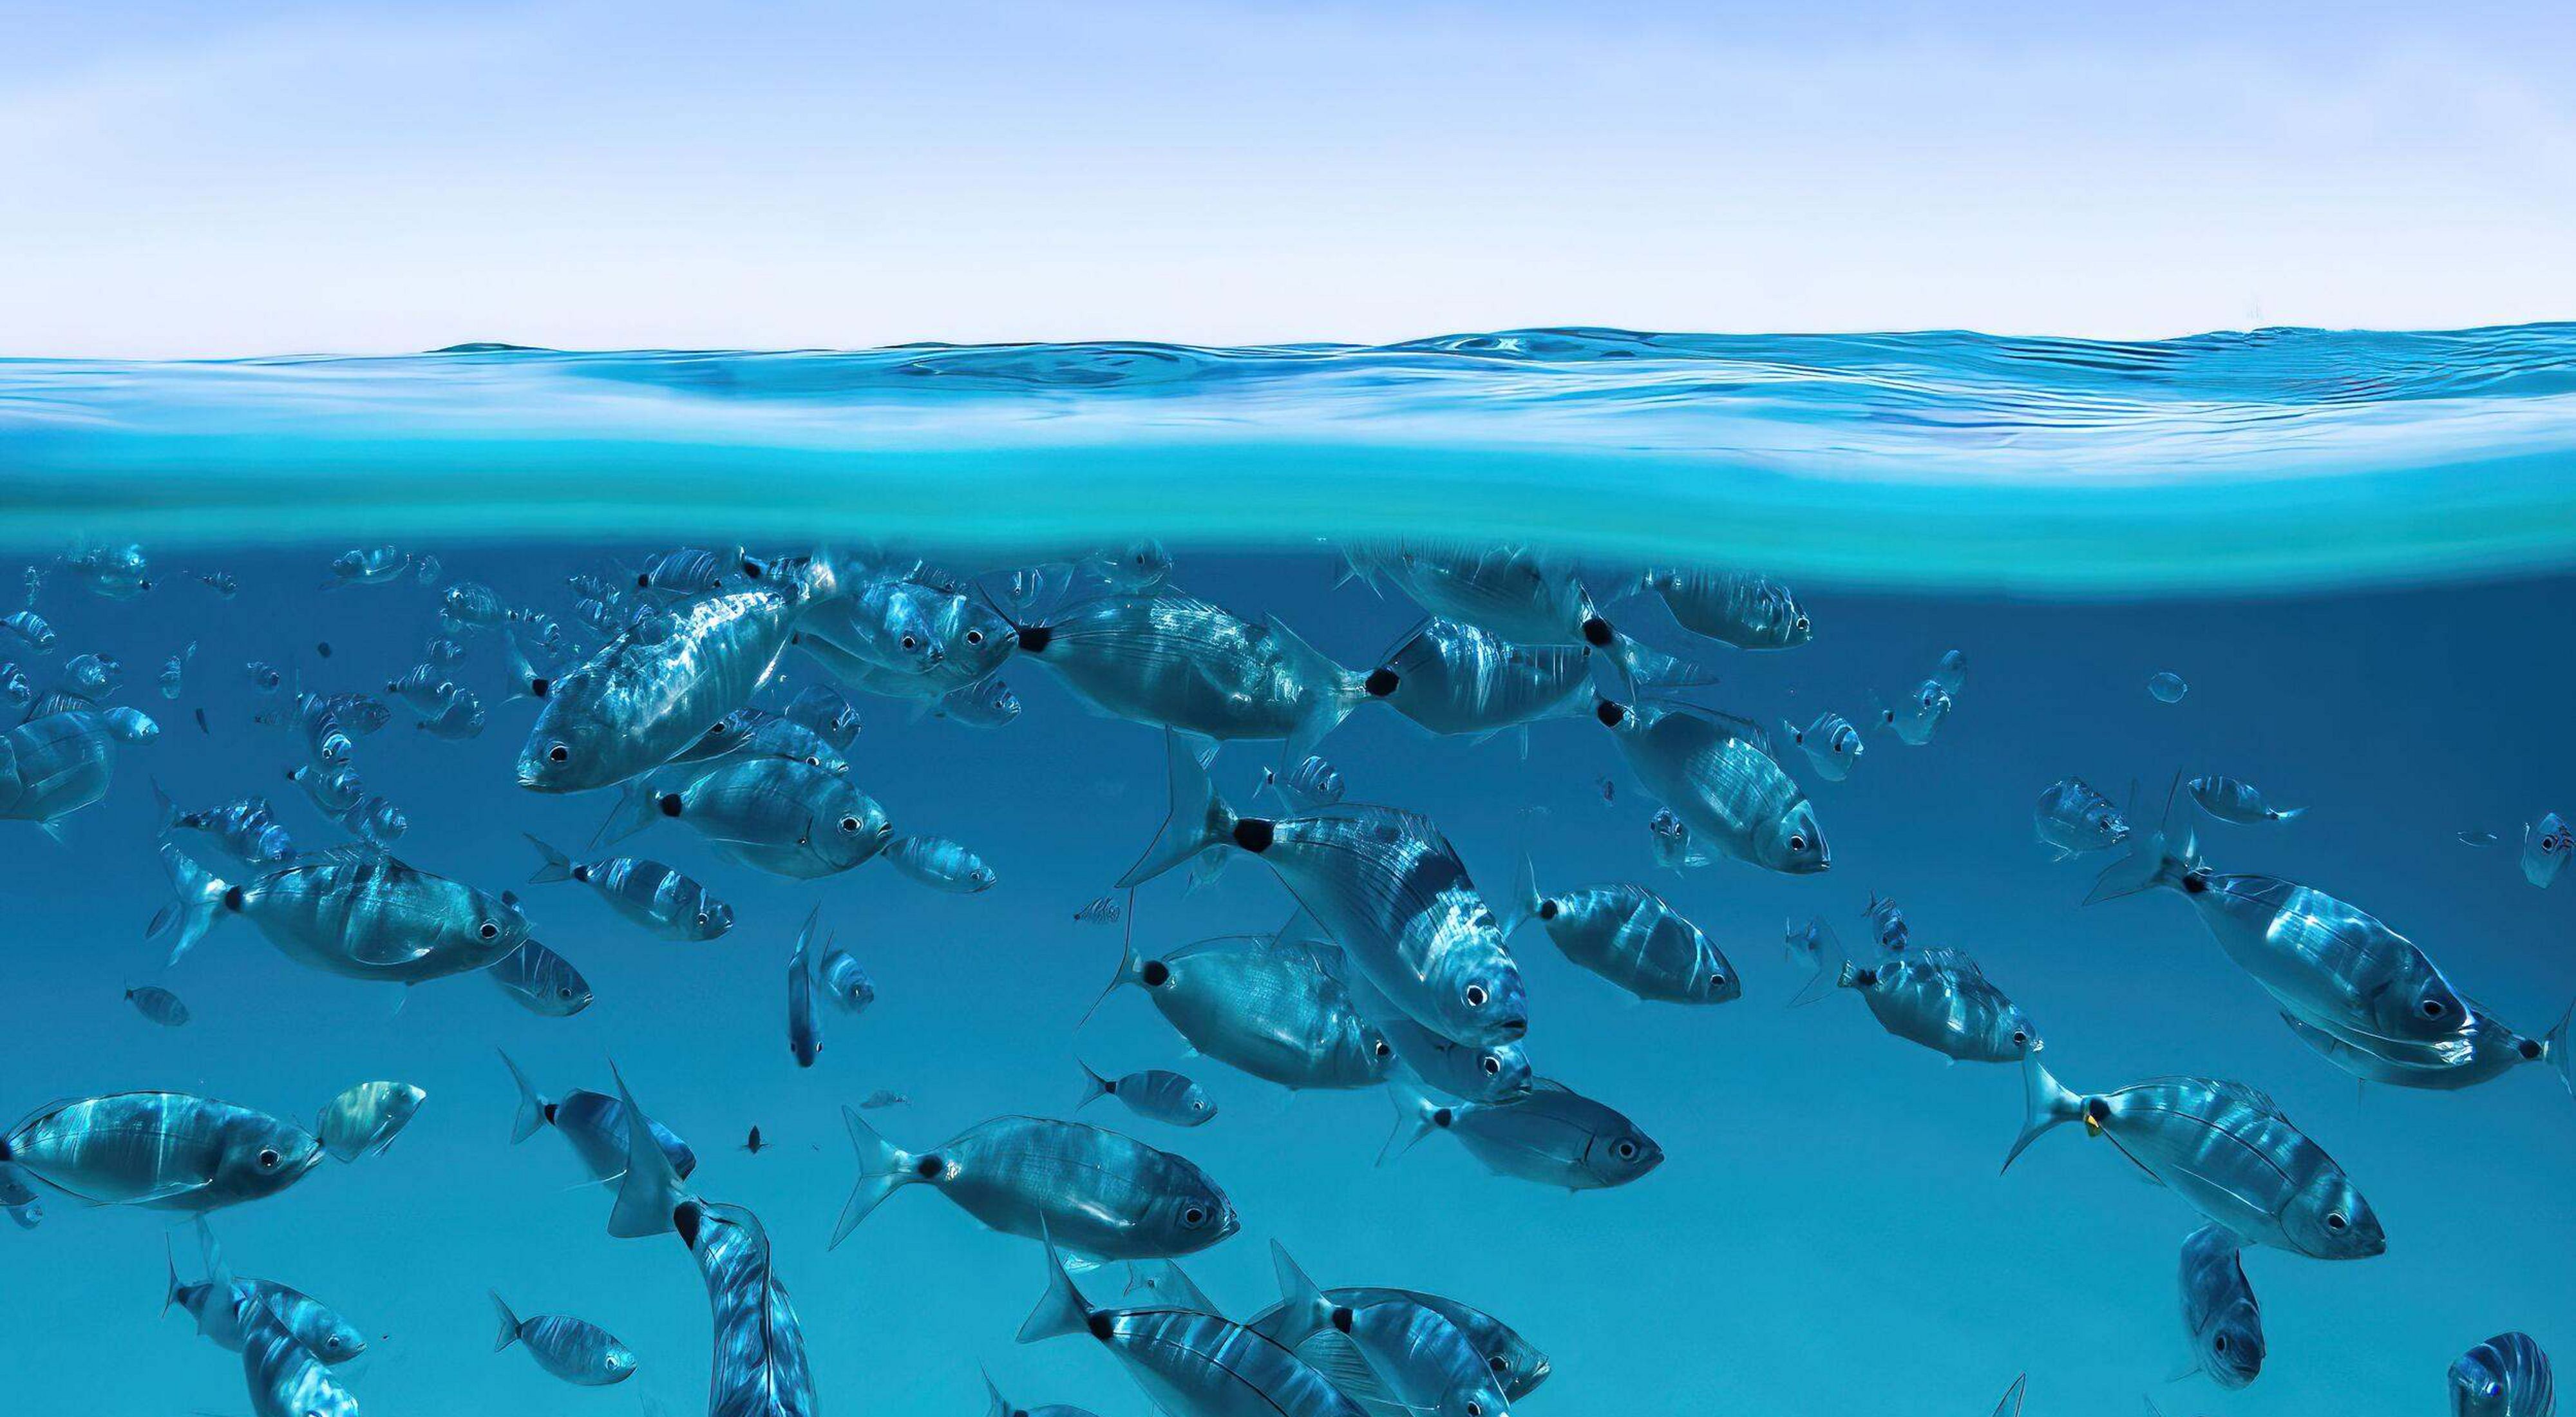 A split-shot at the water's surface with clear skies above and dozens of silver medium-sized porgy fish swimming through clear blue water.